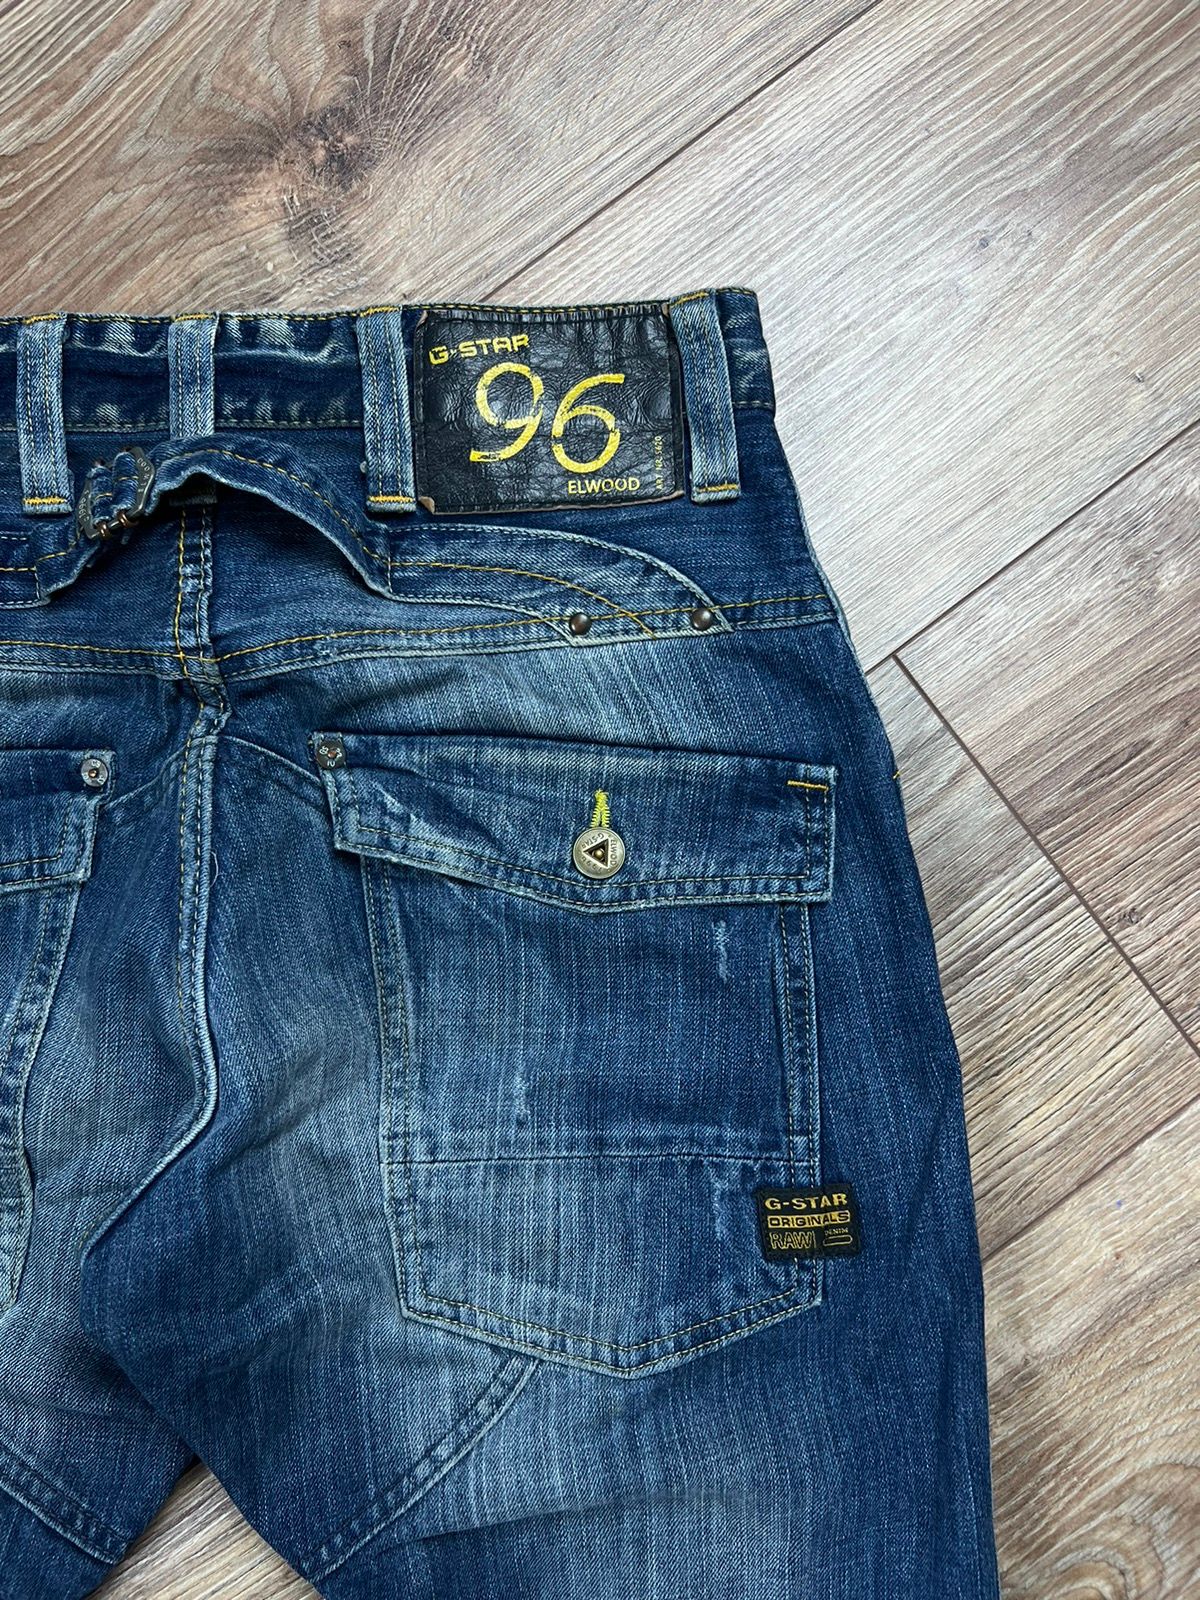 Vintage 💫 90’S G-STAR RAW VINTAGE DOUBLE KNEE OPIUM WASHED JEANS Size US 30 / EU 46 - 3 Thumbnail